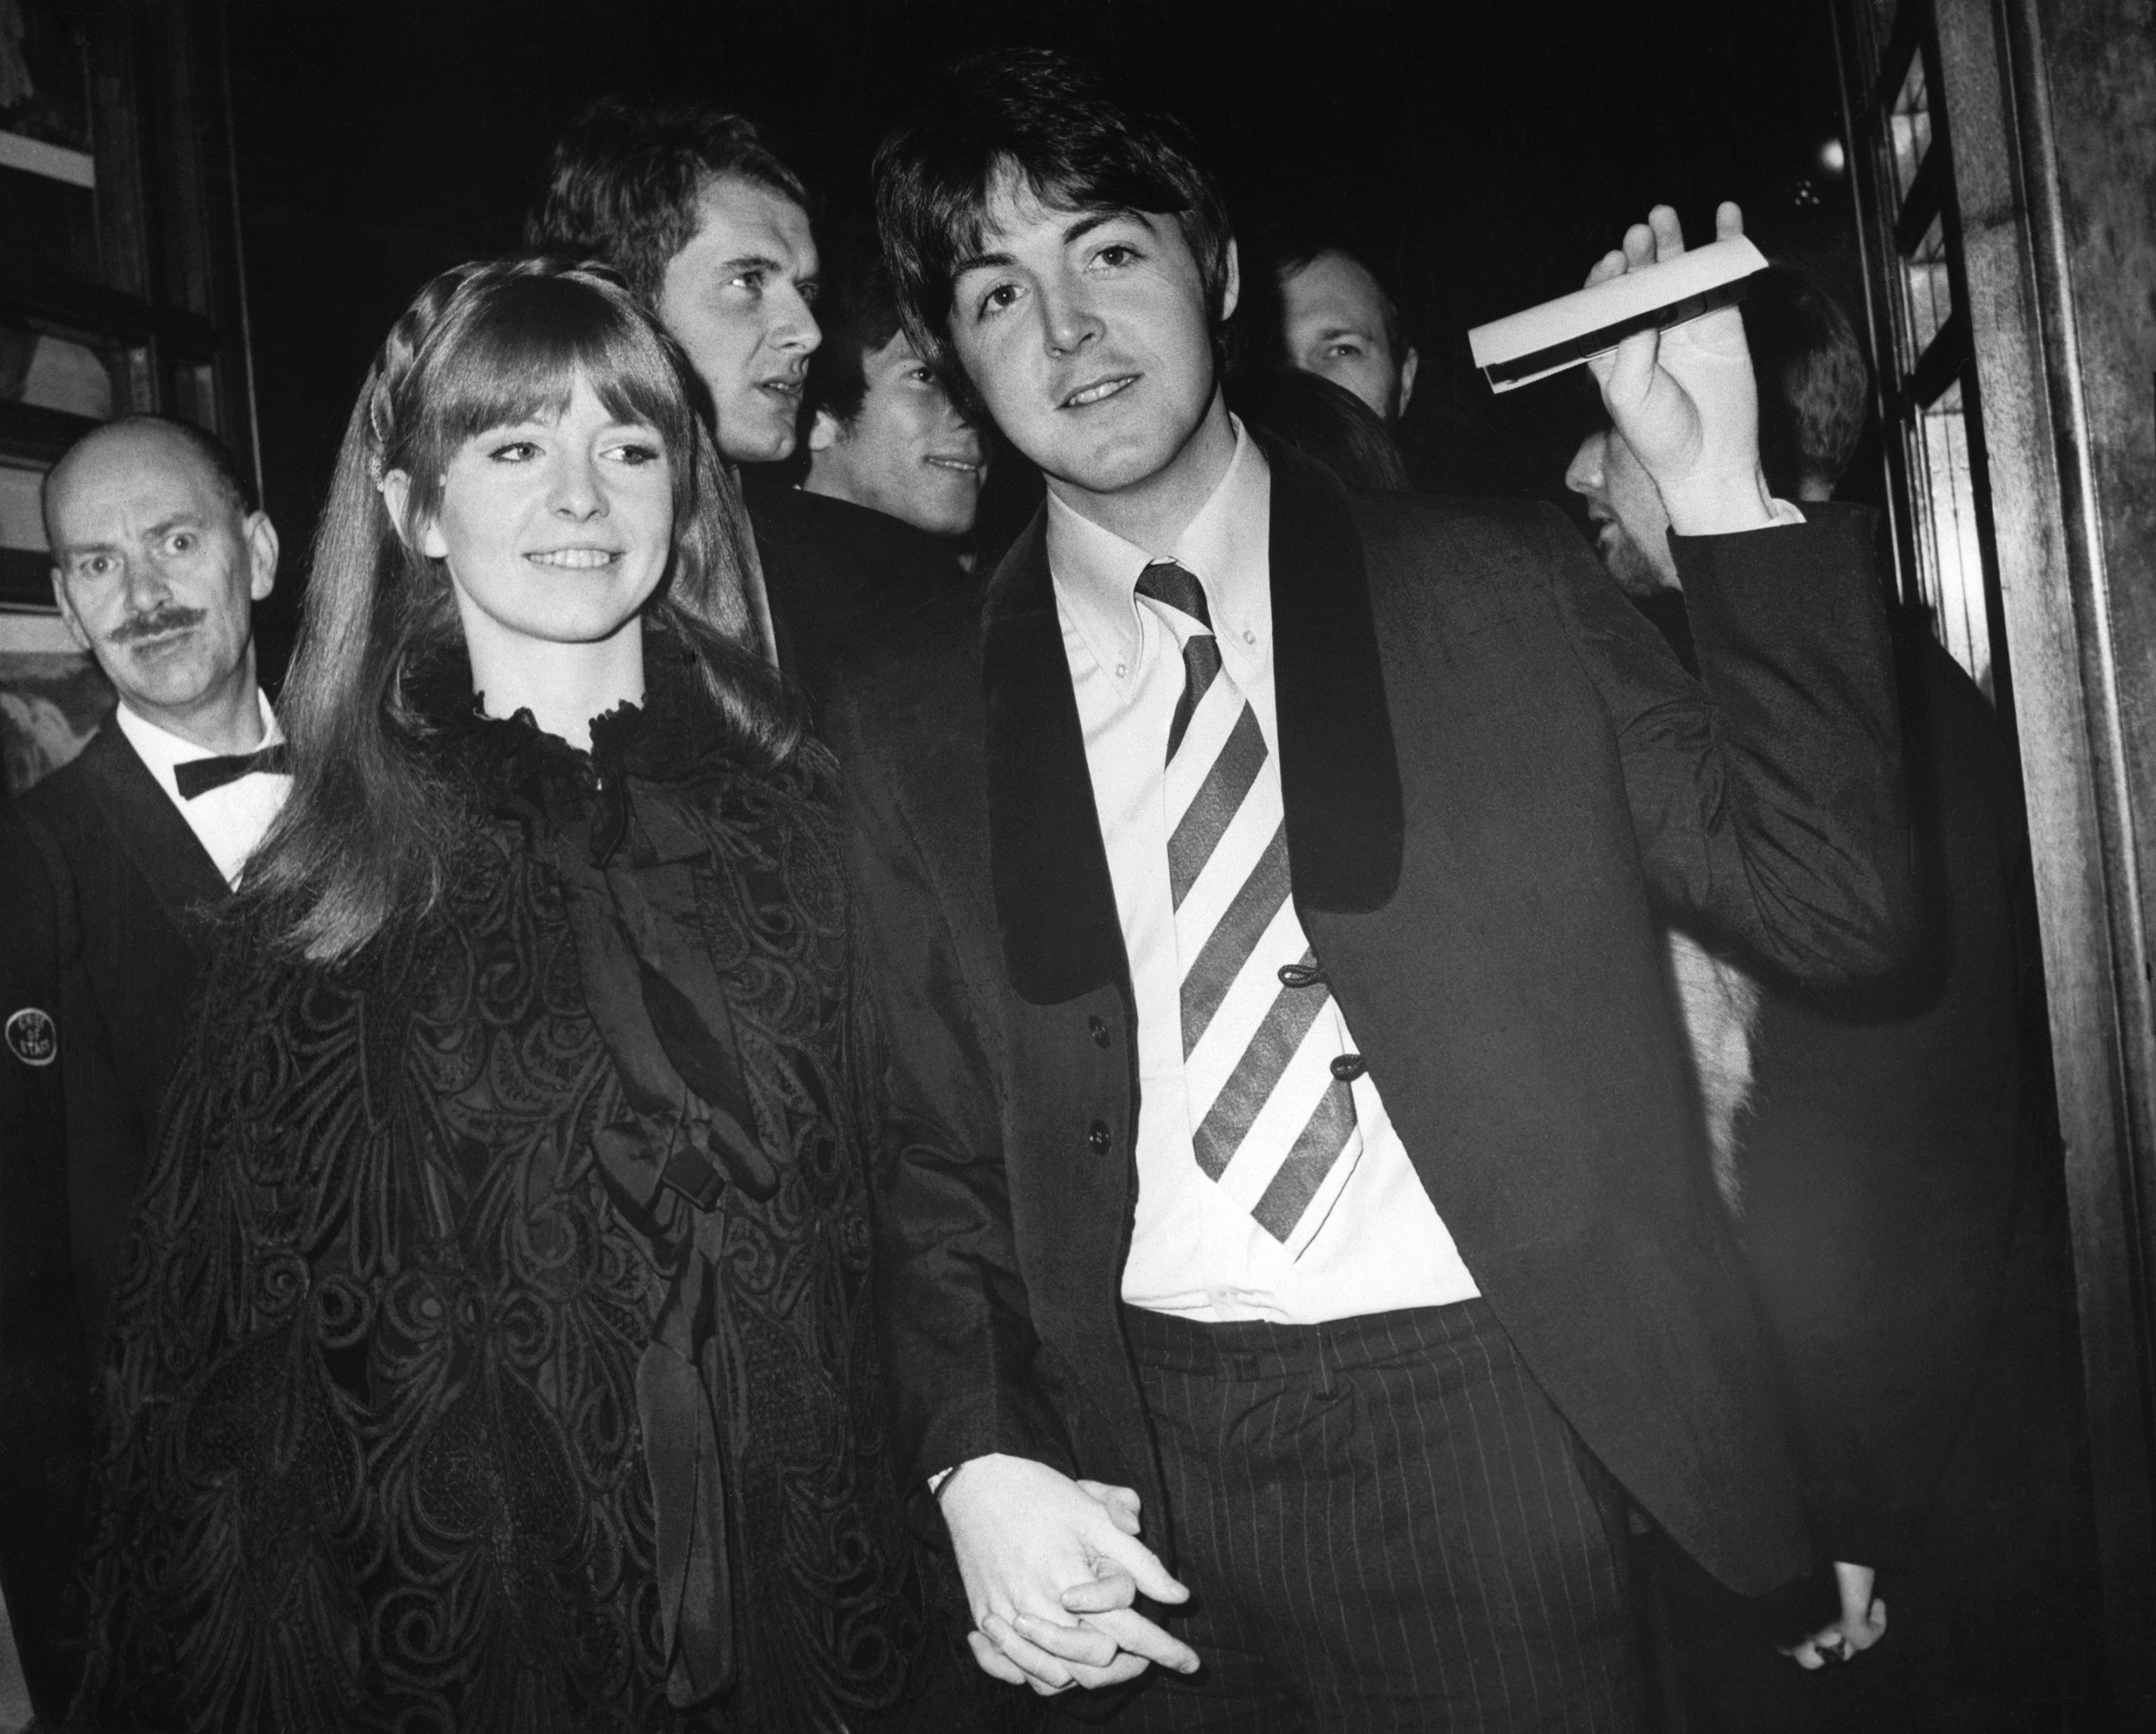 Jane Asher and Paul McCartney in front of a group of people